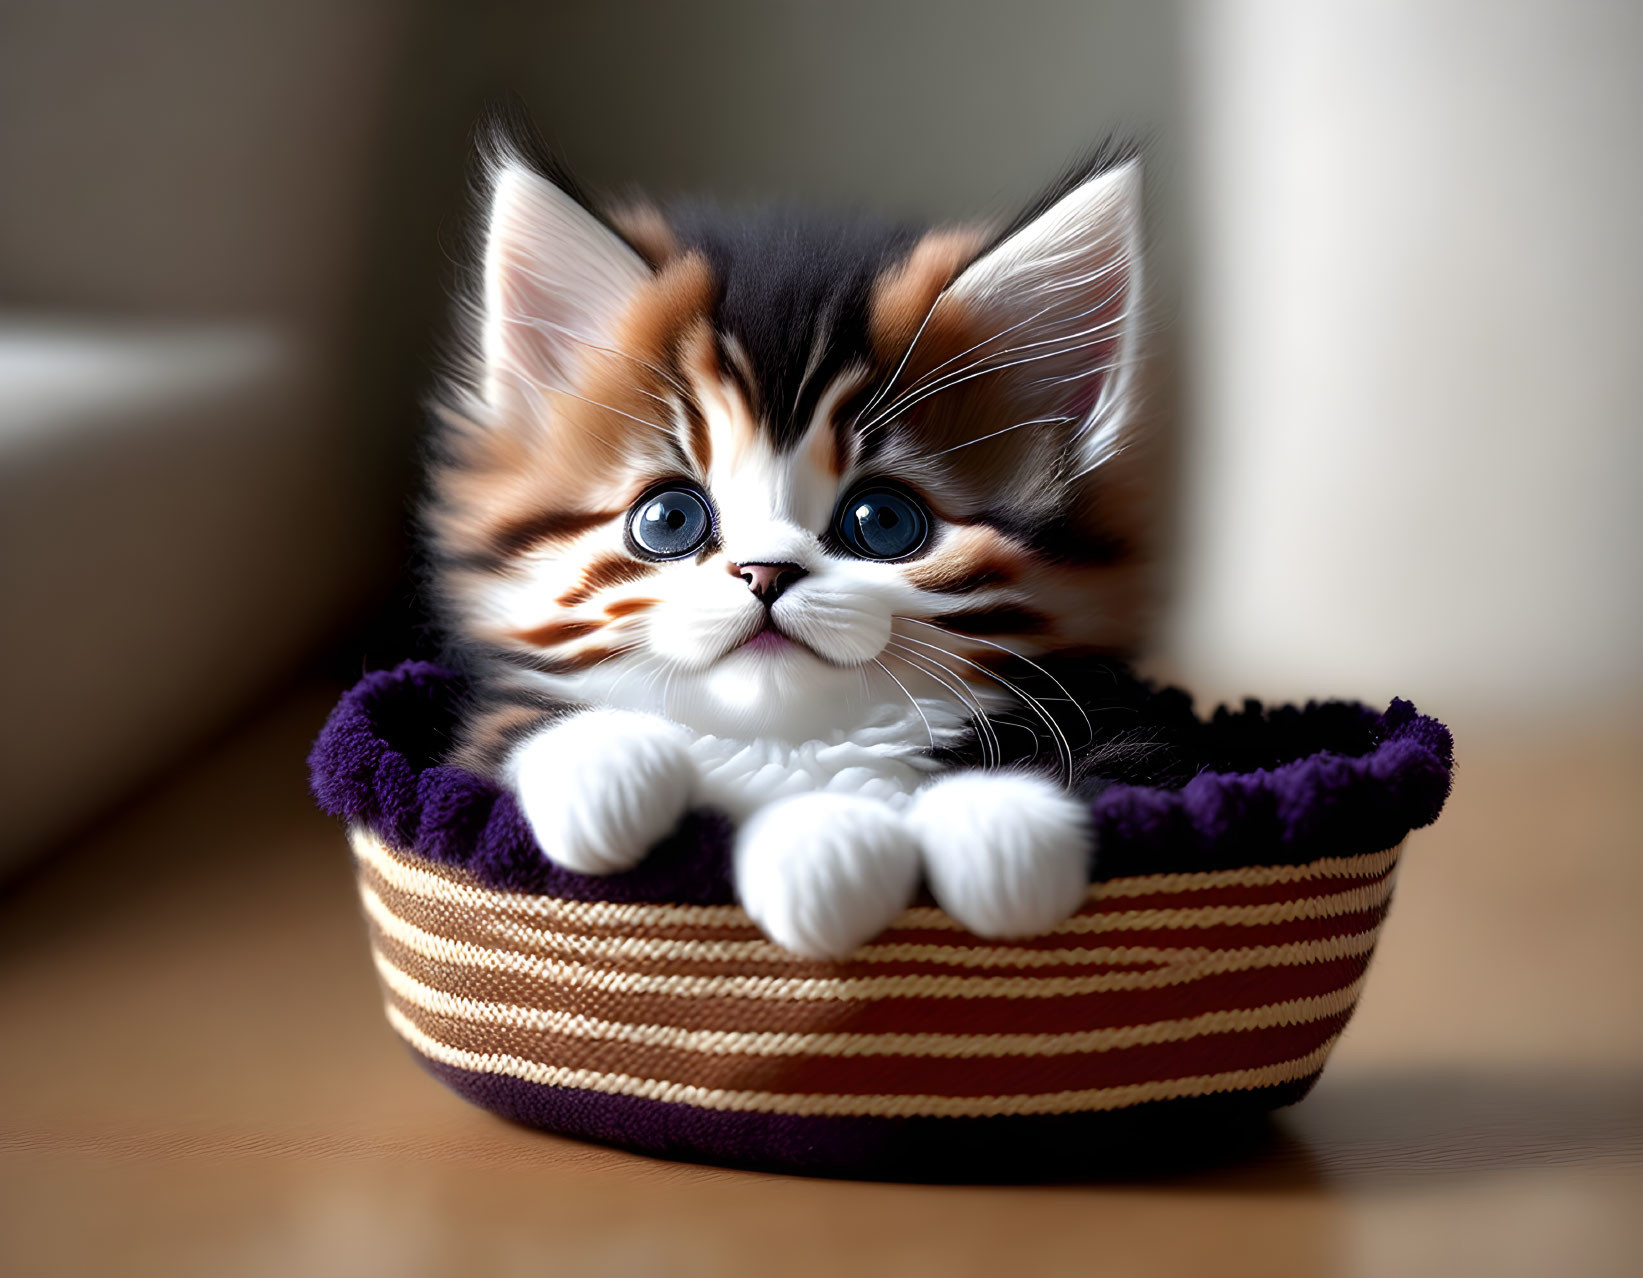 Fluffy black and orange kitten in striped basket with blue eyes